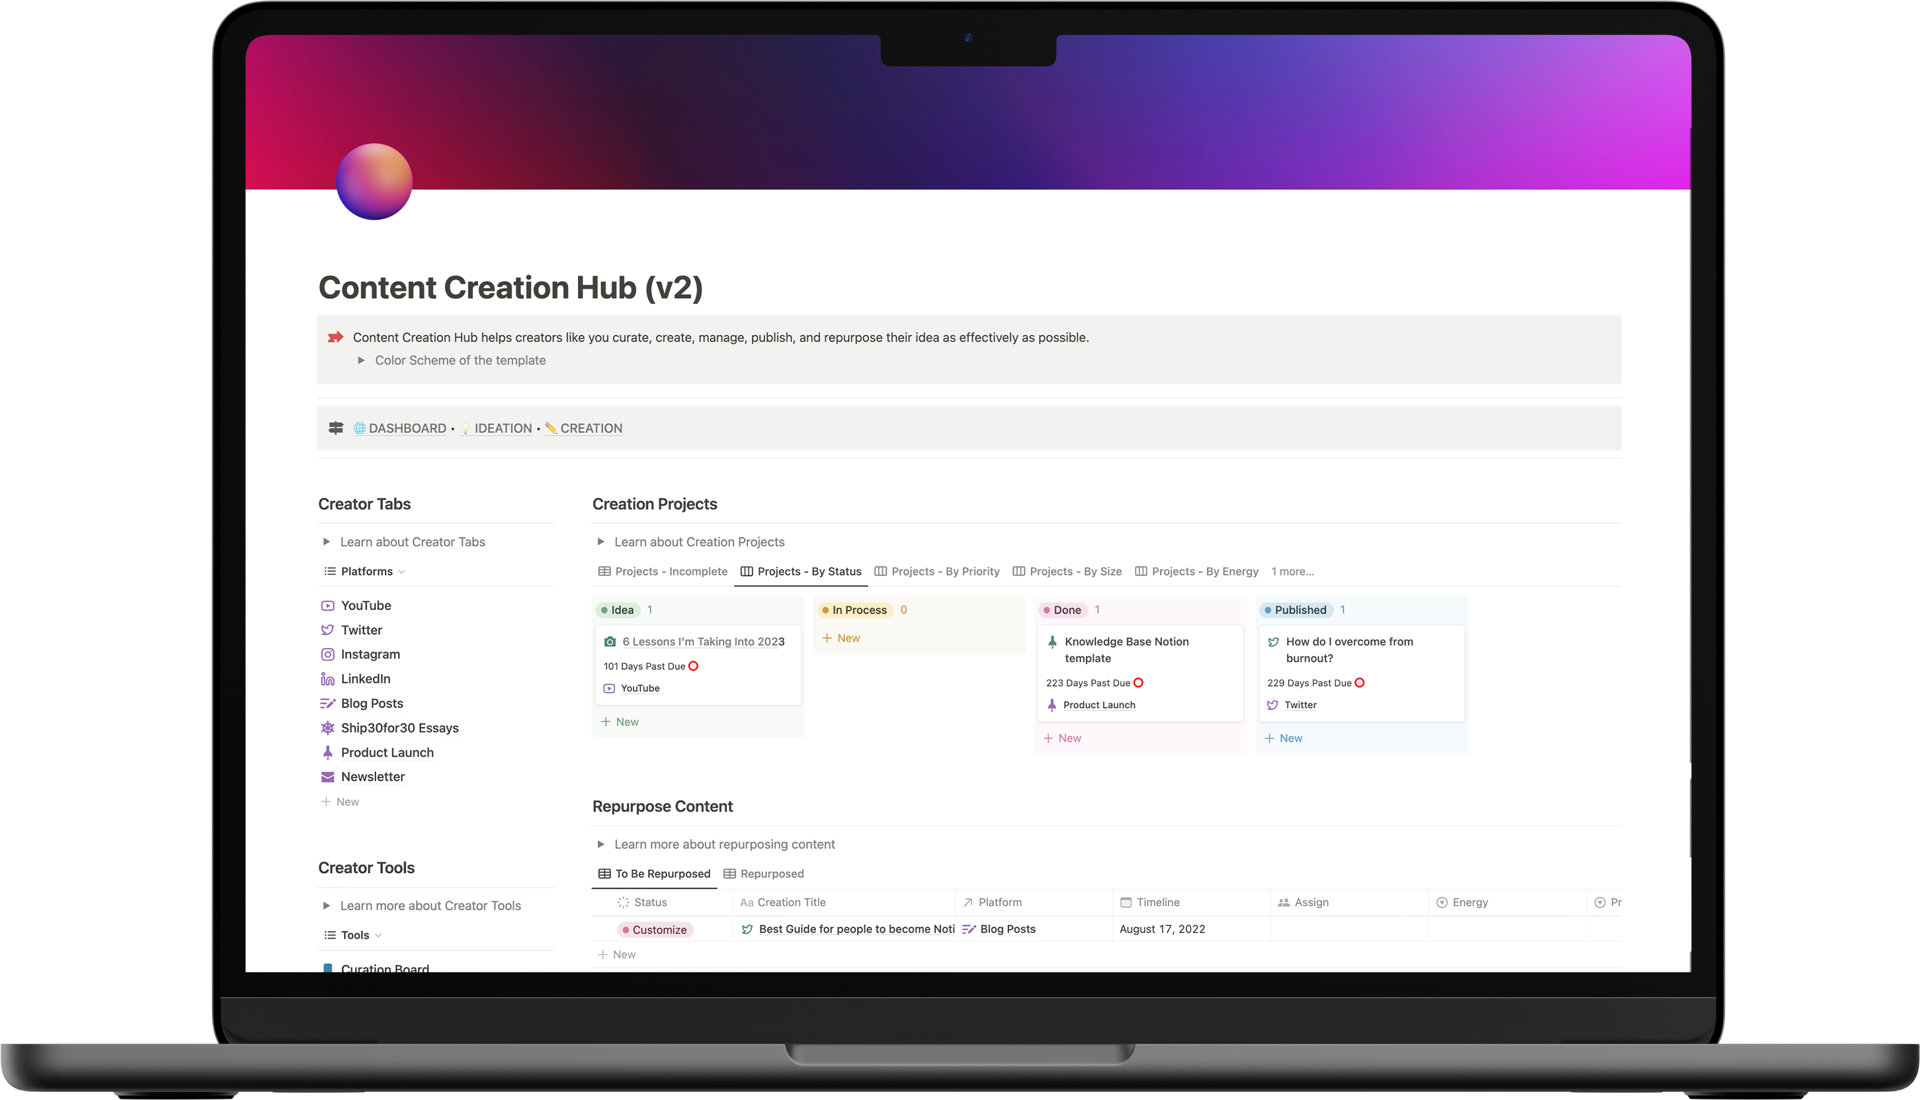 Content Creation Hub       Manage all parts of your Content Creation in Notion